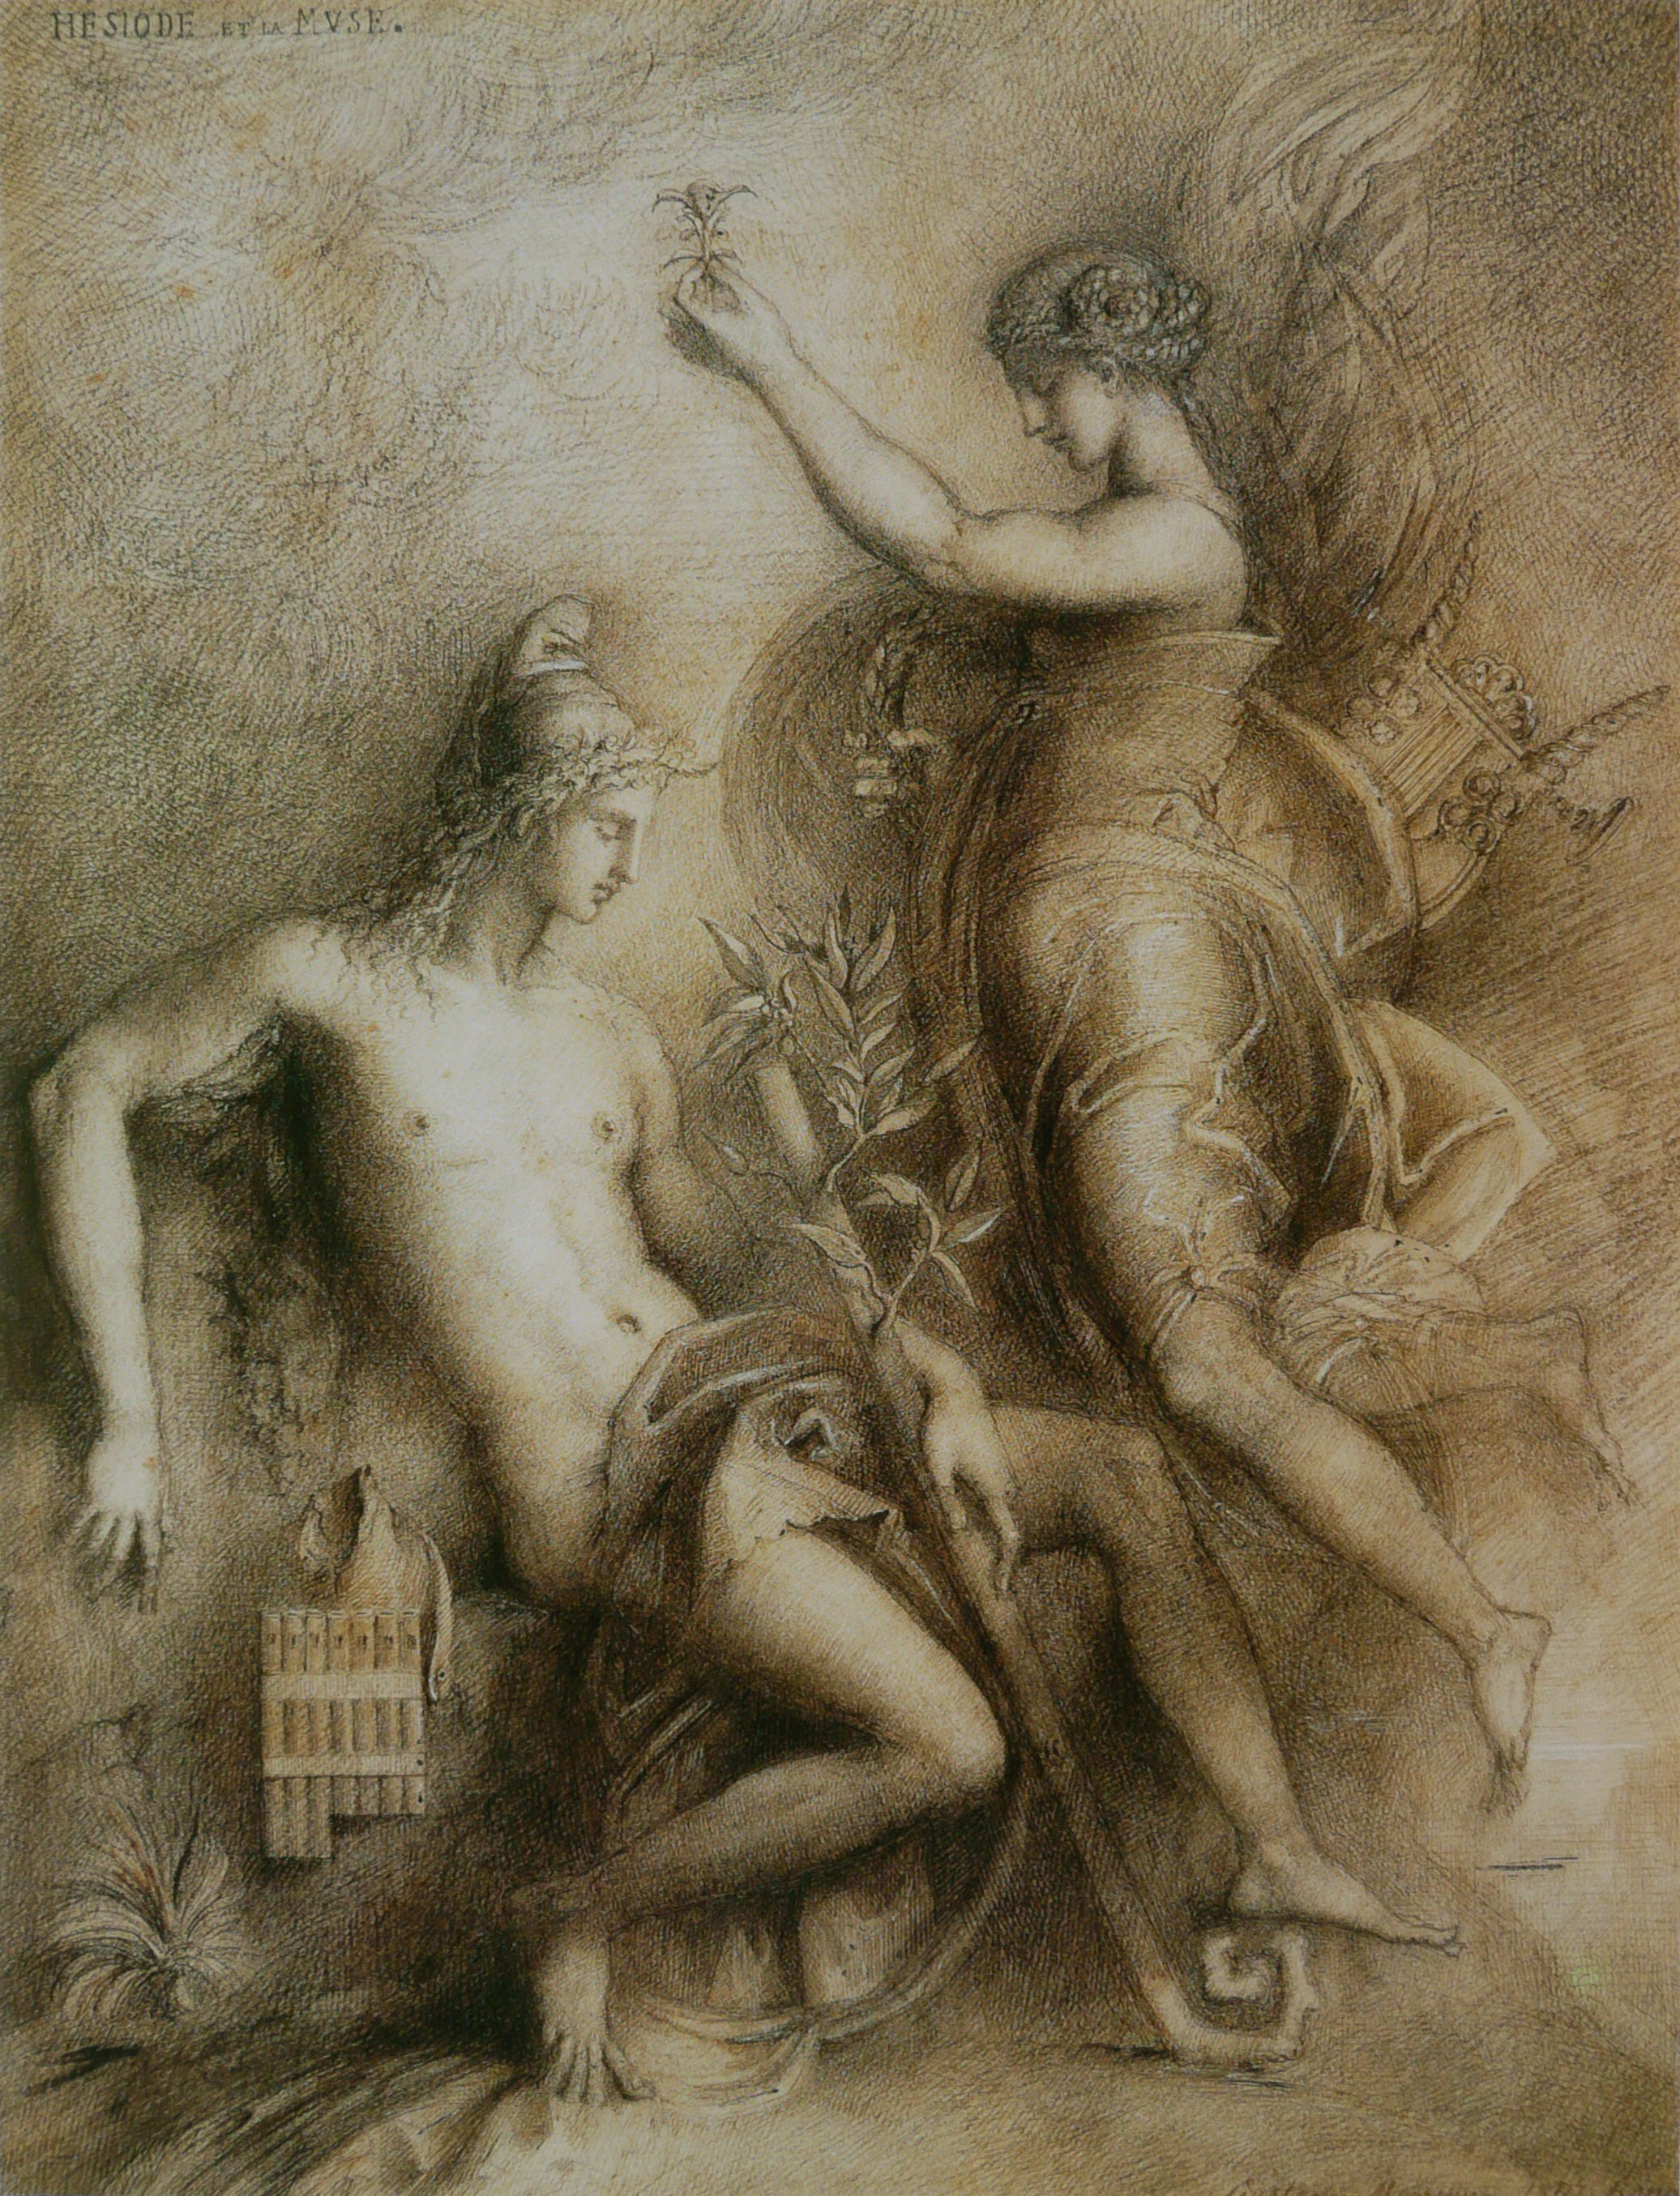 http://upload.wikimedia.org/wikipedia/commons/7/76/Gustave_Moreau_-_H%C3%A9siode_et_la_Muse.jpg